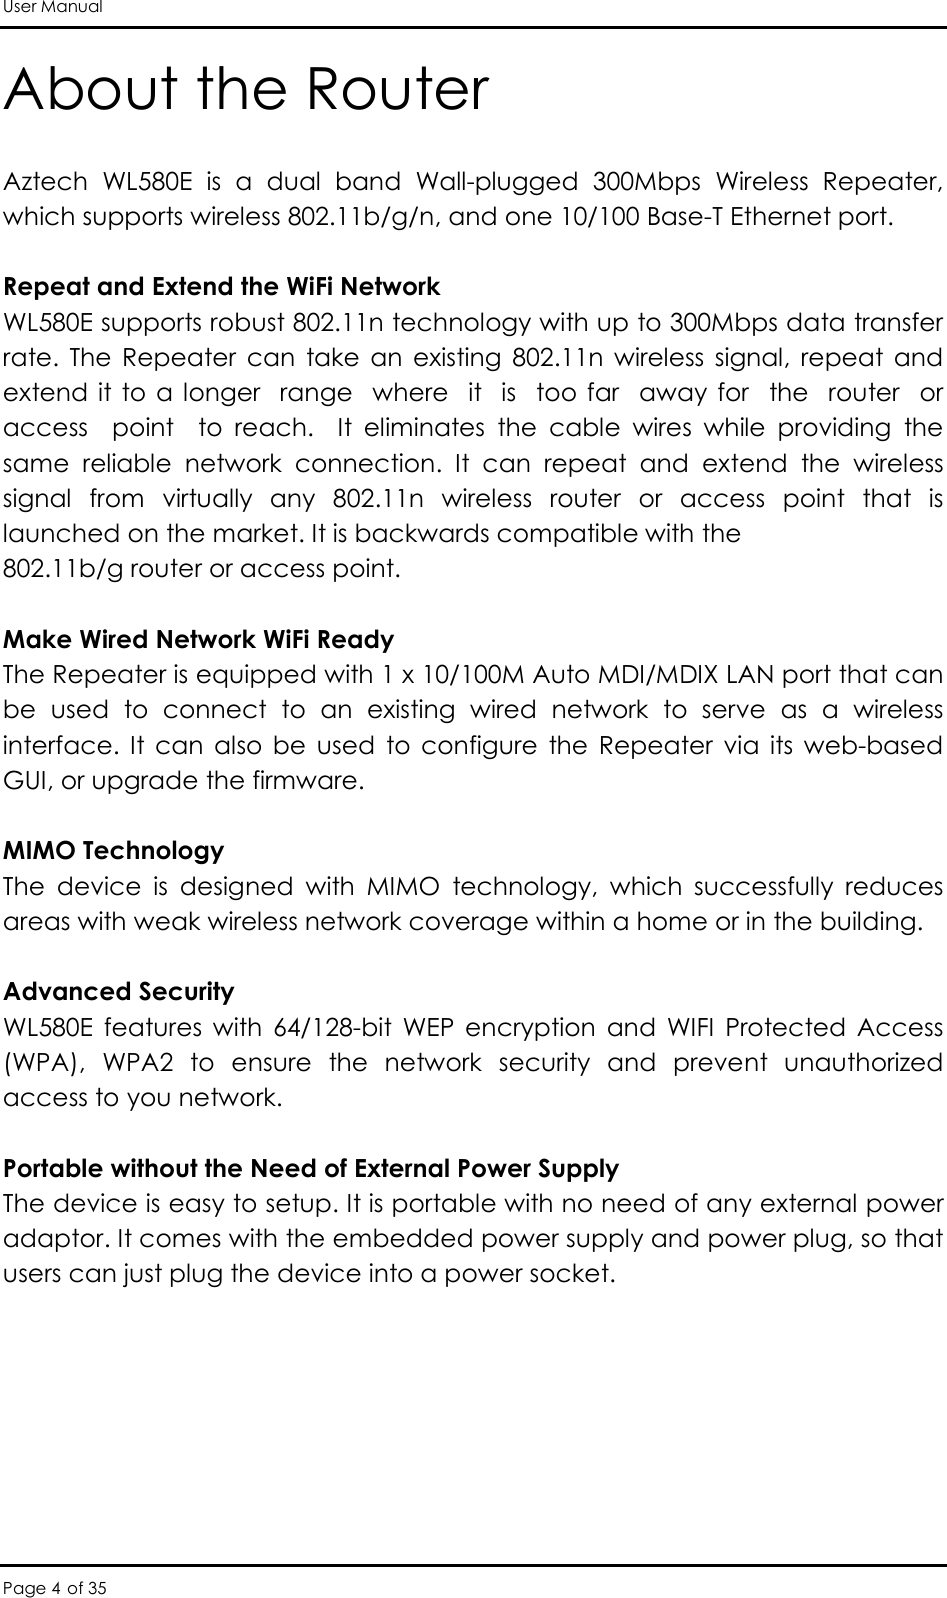 User Manual Page 4 of 35 About the Router Aztech  WL580E  is  a  dual  band  Wall-plugged  300Mbps  Wireless  Repeater, which supports wireless 802.11b/g/n, and one 10/100 Base-T Ethernet port.  Repeat and Extend the WiFi Network WL580E supports robust 802.11n technology with up to 300Mbps data transfer rate.  The  Repeater  can  take  an  existing  802.11n  wireless  signal,  repeat  and extend it  to a  longer  range   where    it  is    too far   away for    the  router   or  access    point    to  reach.    It  eliminates  the  cable  wires  while  providing  the same  reliable  network  connection.  It  can  repeat  and  extend  the  wireless signal  from  virtually  any  802.11n  wireless  router  or  access  point  that  is launched on the market. It is backwards compatible with the 802.11b/g router or access point.  Make Wired Network WiFi Ready The Repeater is equipped with 1 x 10/100M Auto MDI/MDIX LAN port that can be  used  to  connect  to  an  existing  wired  network  to  serve  as  a  wireless interface.  It  can  also  be  used  to  configure  the  Repeater  via  its  web-based GUI, or upgrade the firmware.  MIMO Technology The  device  is  designed  with  MIMO  technology,  which  successfully  reduces areas with weak wireless network coverage within a home or in the building.  Advanced Security WL580E  features  with  64/128-bit  WEP  encryption  and  WIFI  Protected  Access (WPA),  WPA2  to  ensure  the  network  security  and  prevent  unauthorized access to you network.  Portable without the Need of External Power Supply The device is easy to setup. It is portable with no need of any external power adaptor. It comes with the embedded power supply and power plug, so that users can just plug the device into a power socket. 